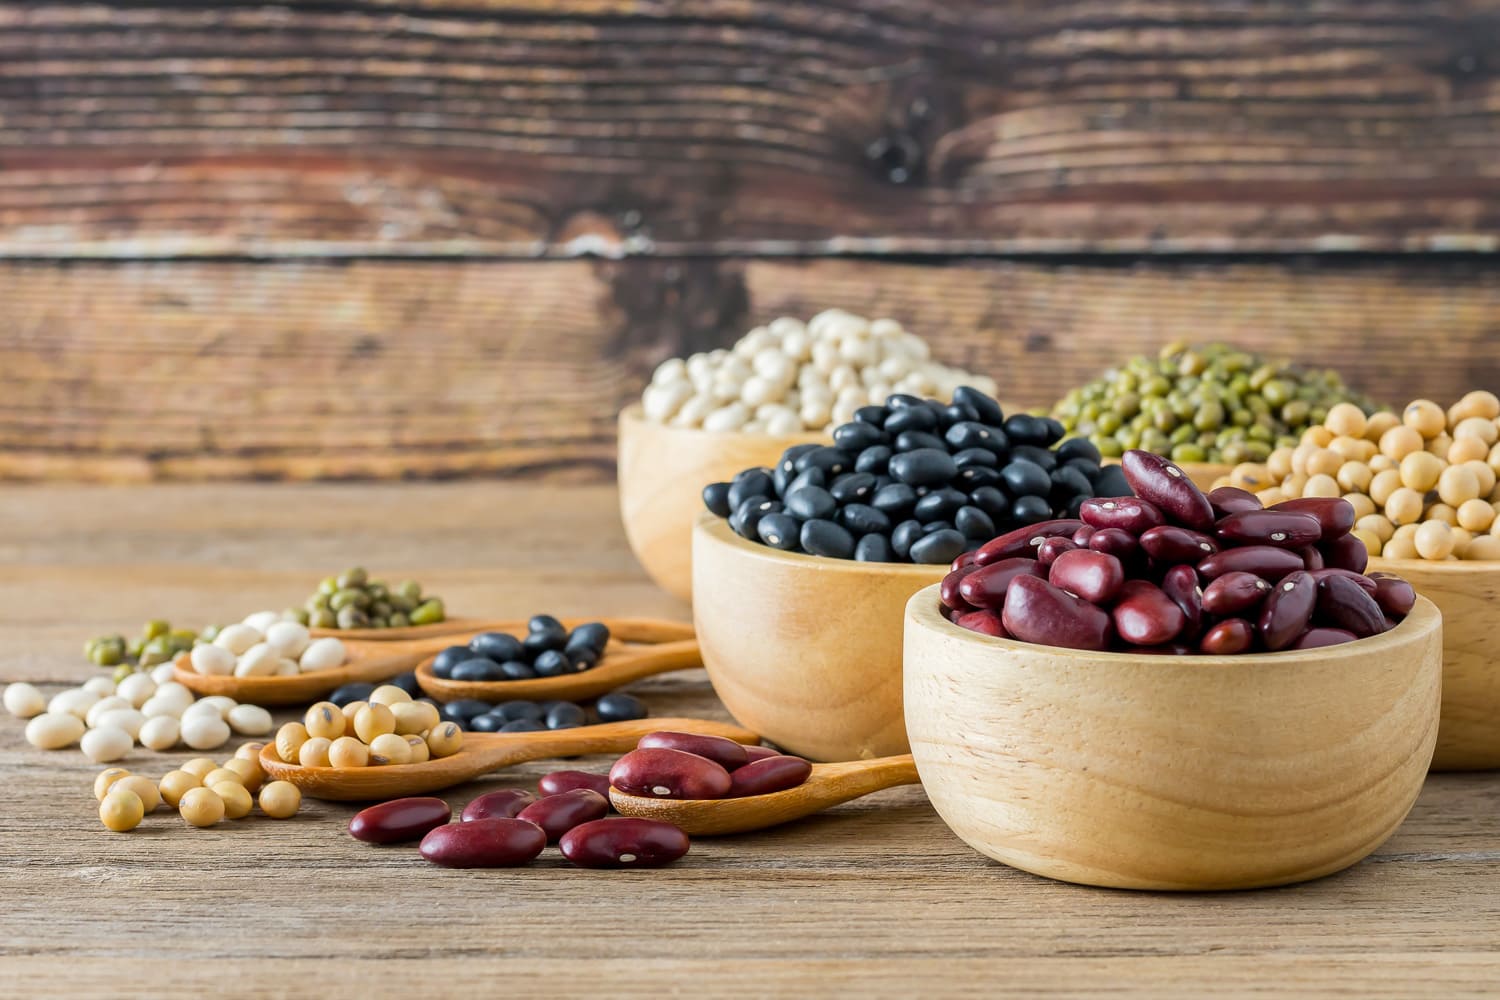 Various grains such as soybeans, black beans, red beans, dried corn in a wooden cup on a wooden table background.